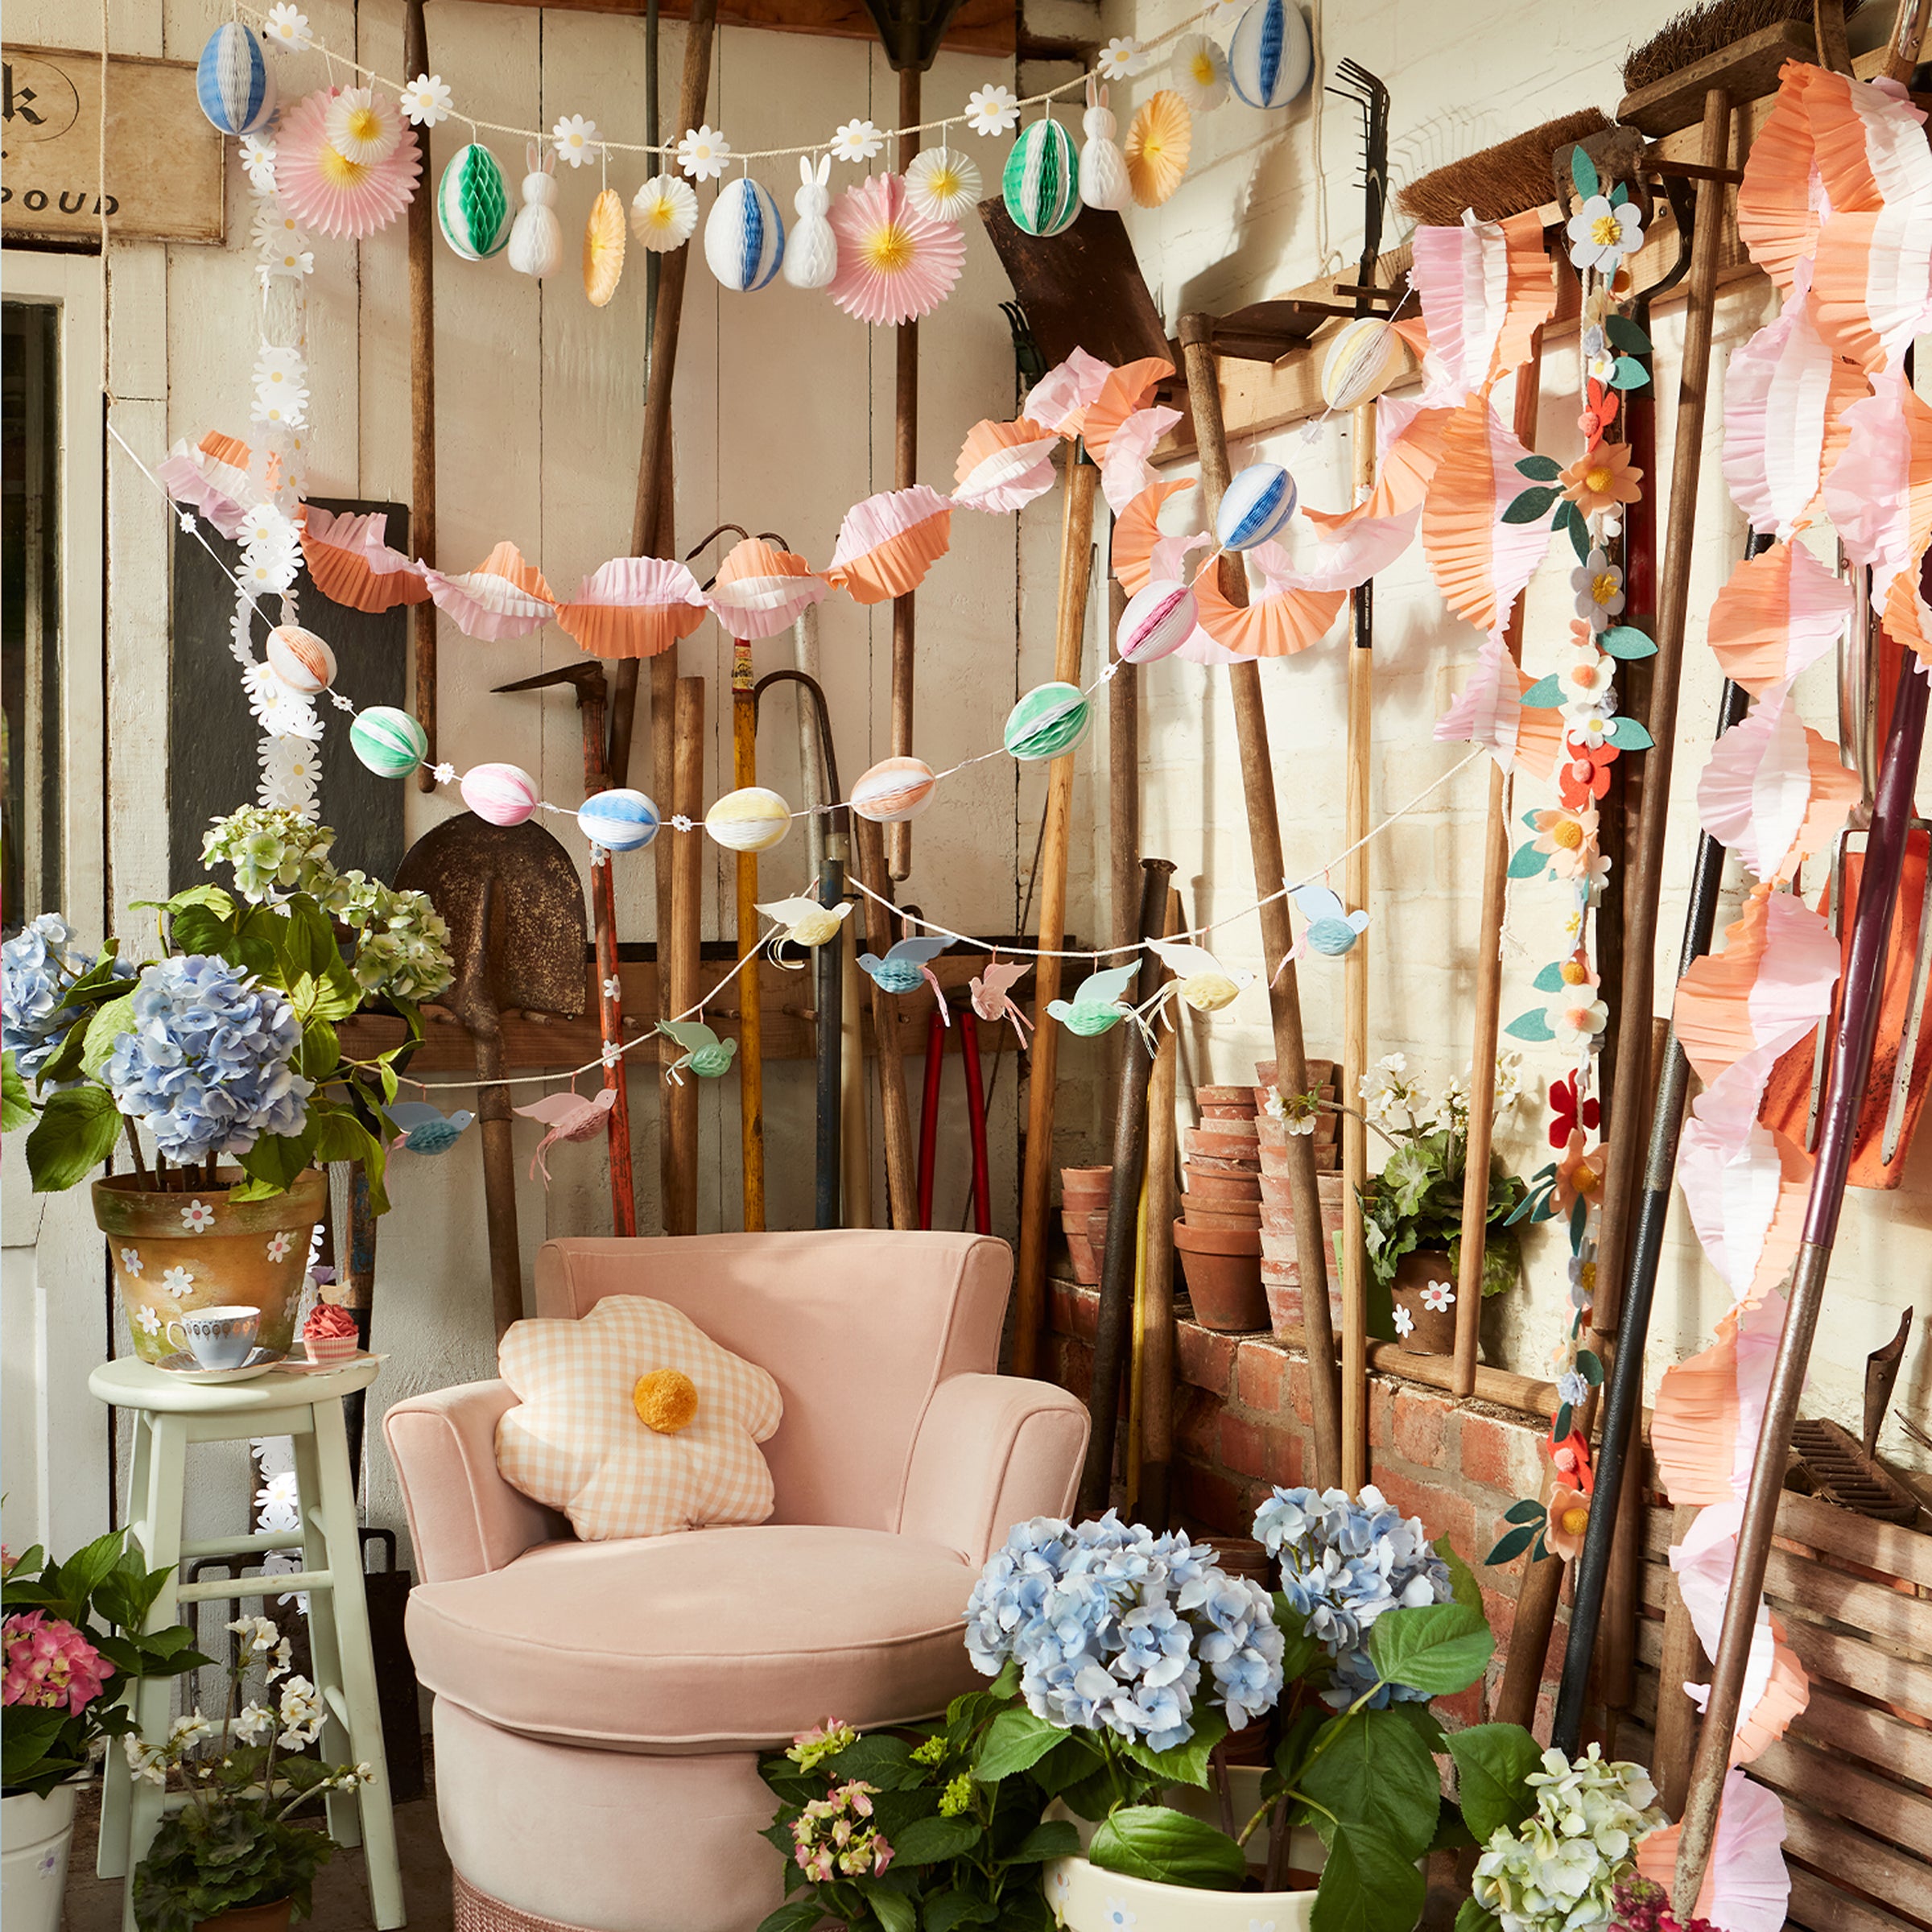 Our paper bird garland is an excellent way to decorate your home.